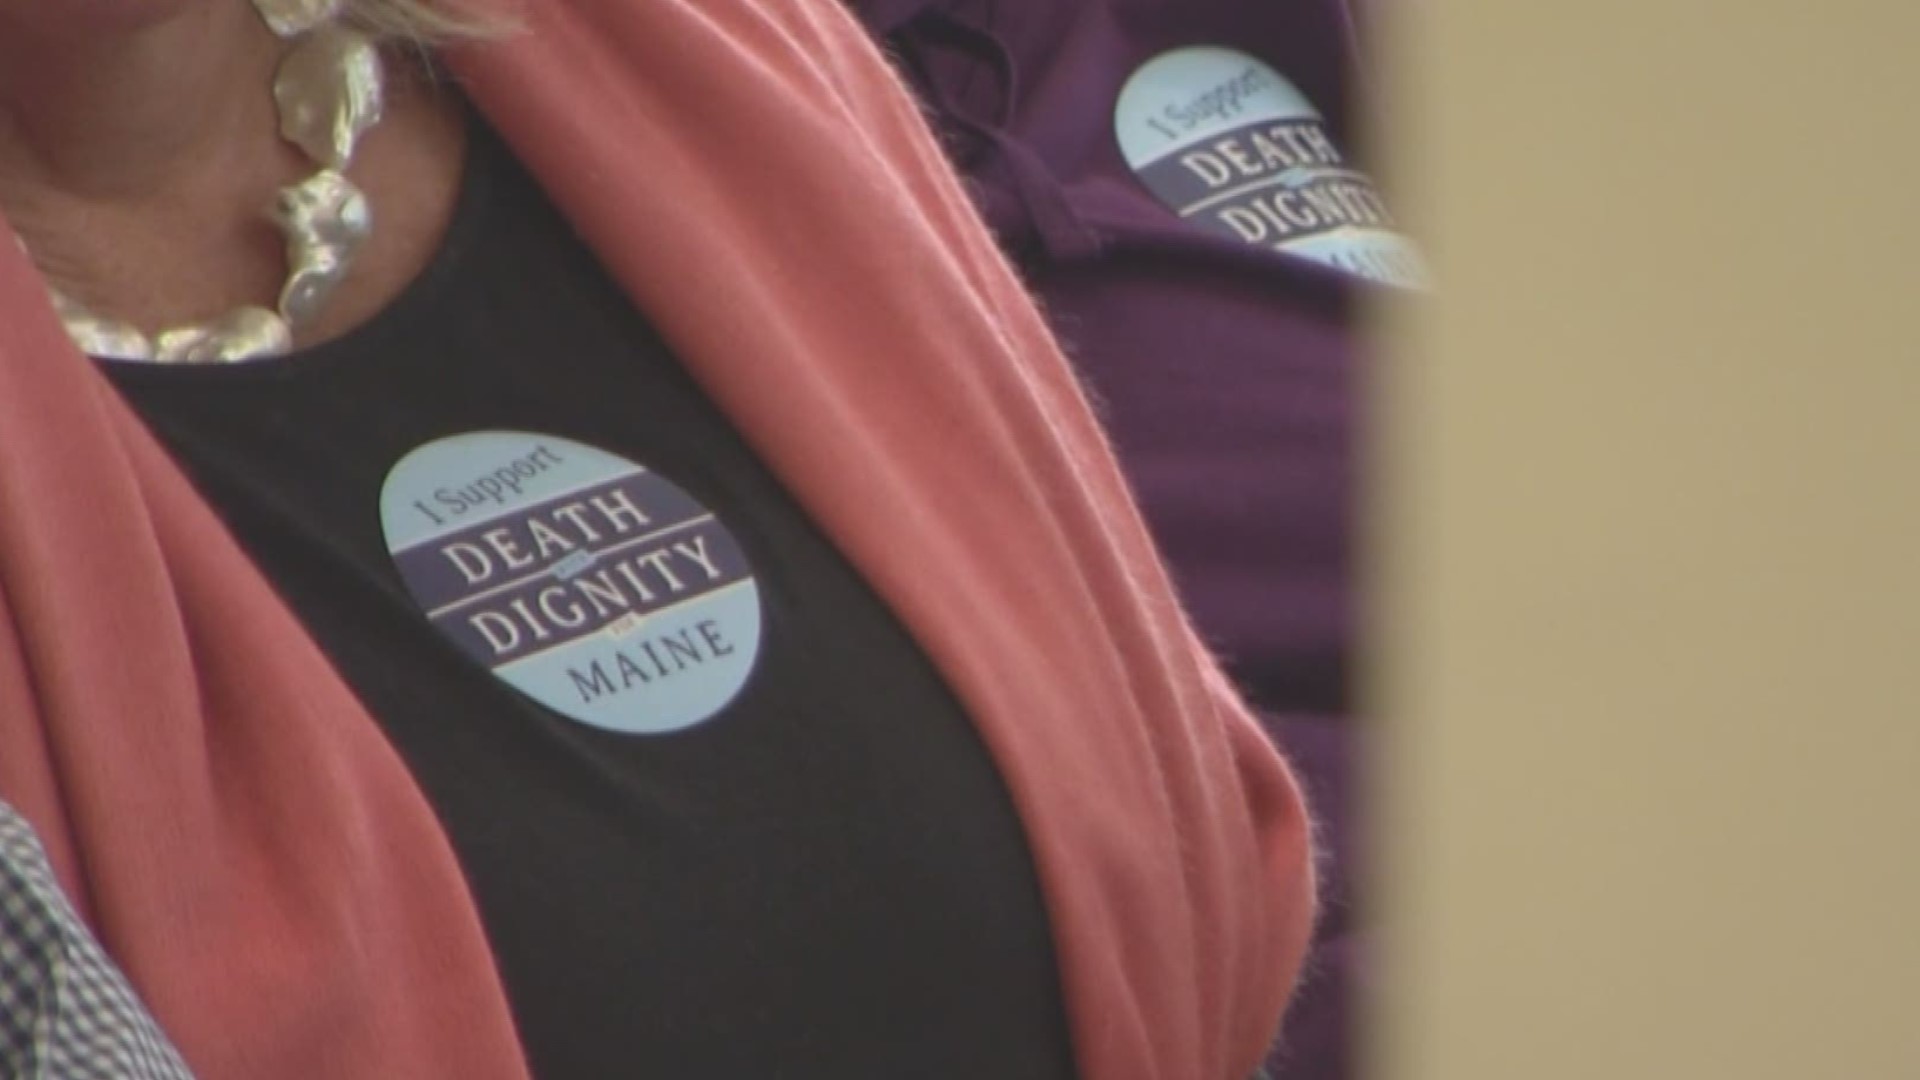 Supporters and opponents of a 'Death with Dignity' bill in Maine testified on Wednesday.